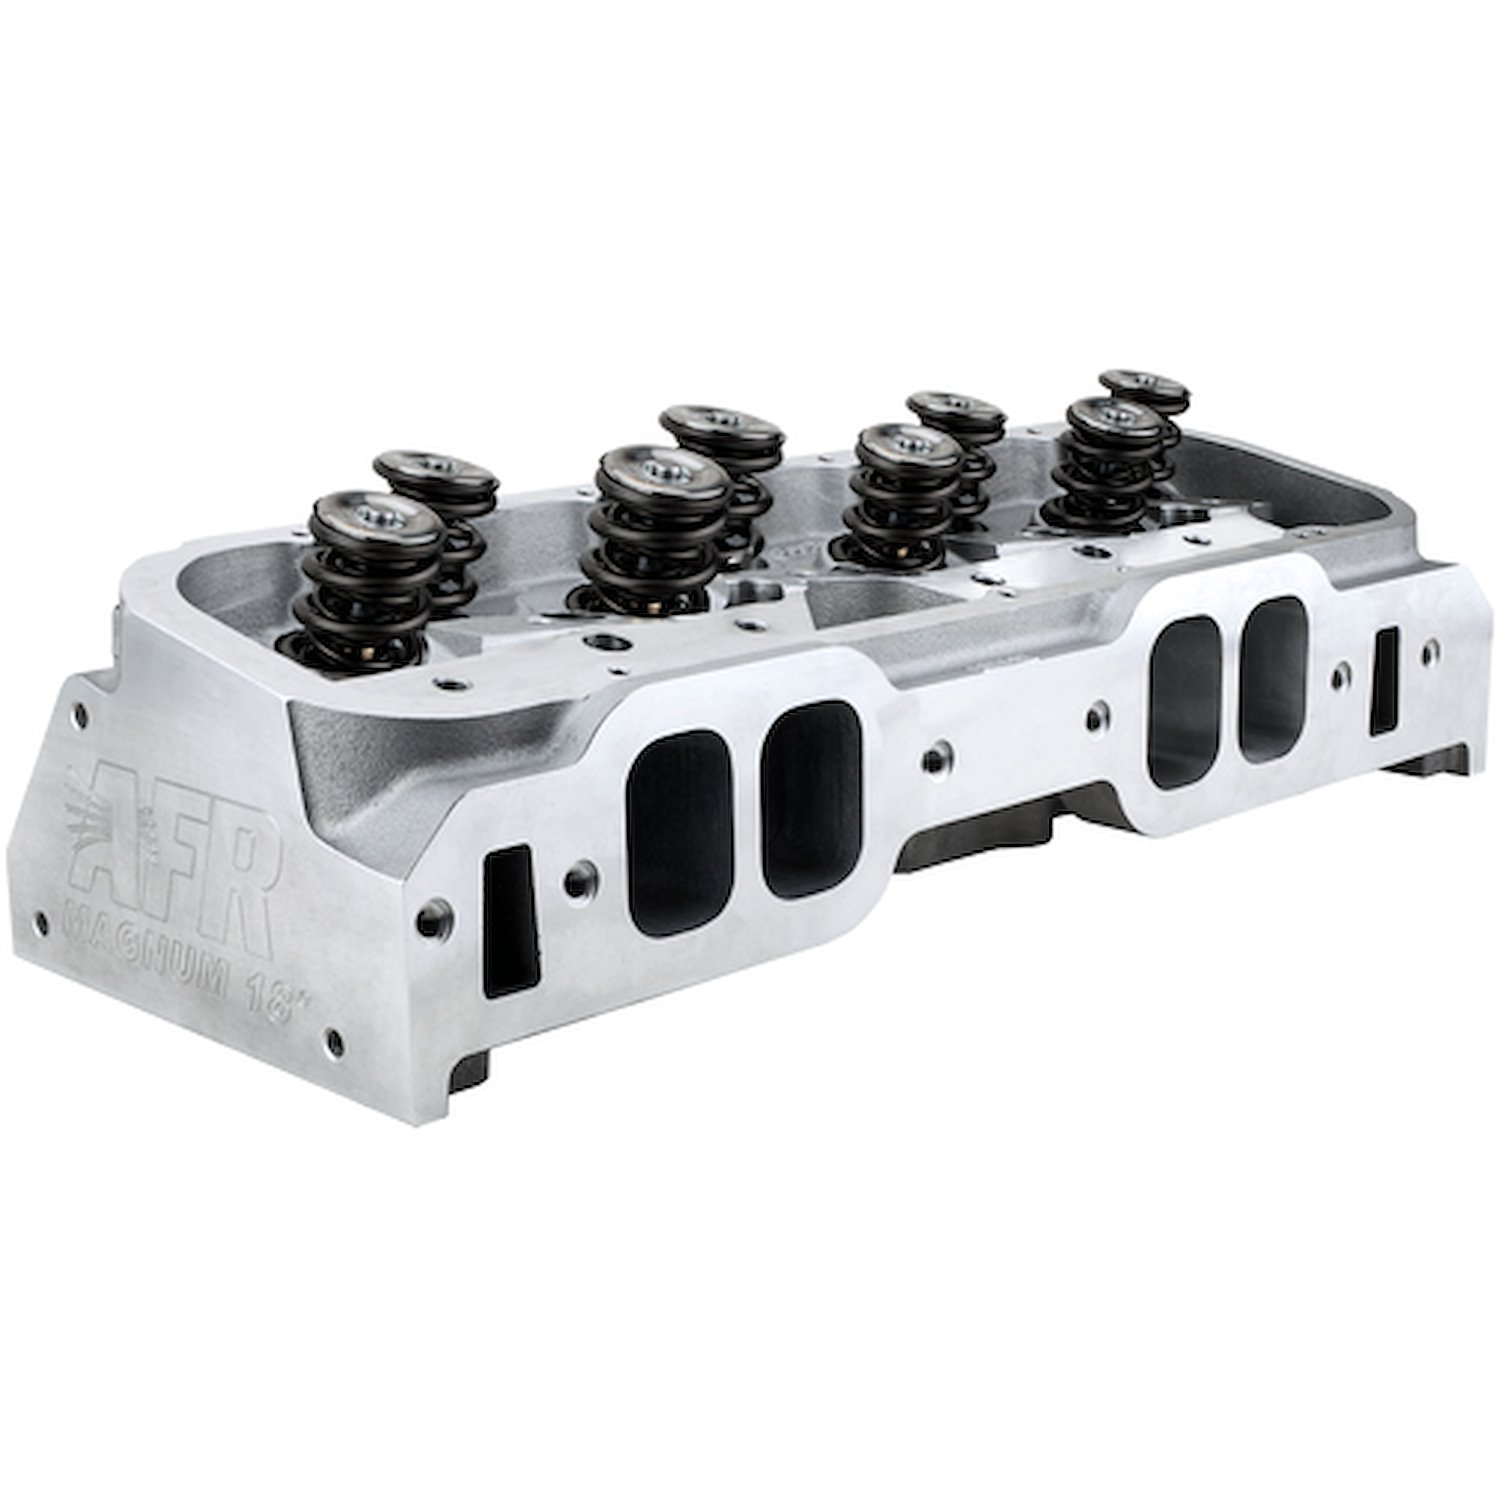 Magnum 18 Degree 457 cc Racing Aluminum Cylinder Heads for Big Block Chevy - Rectangle Port